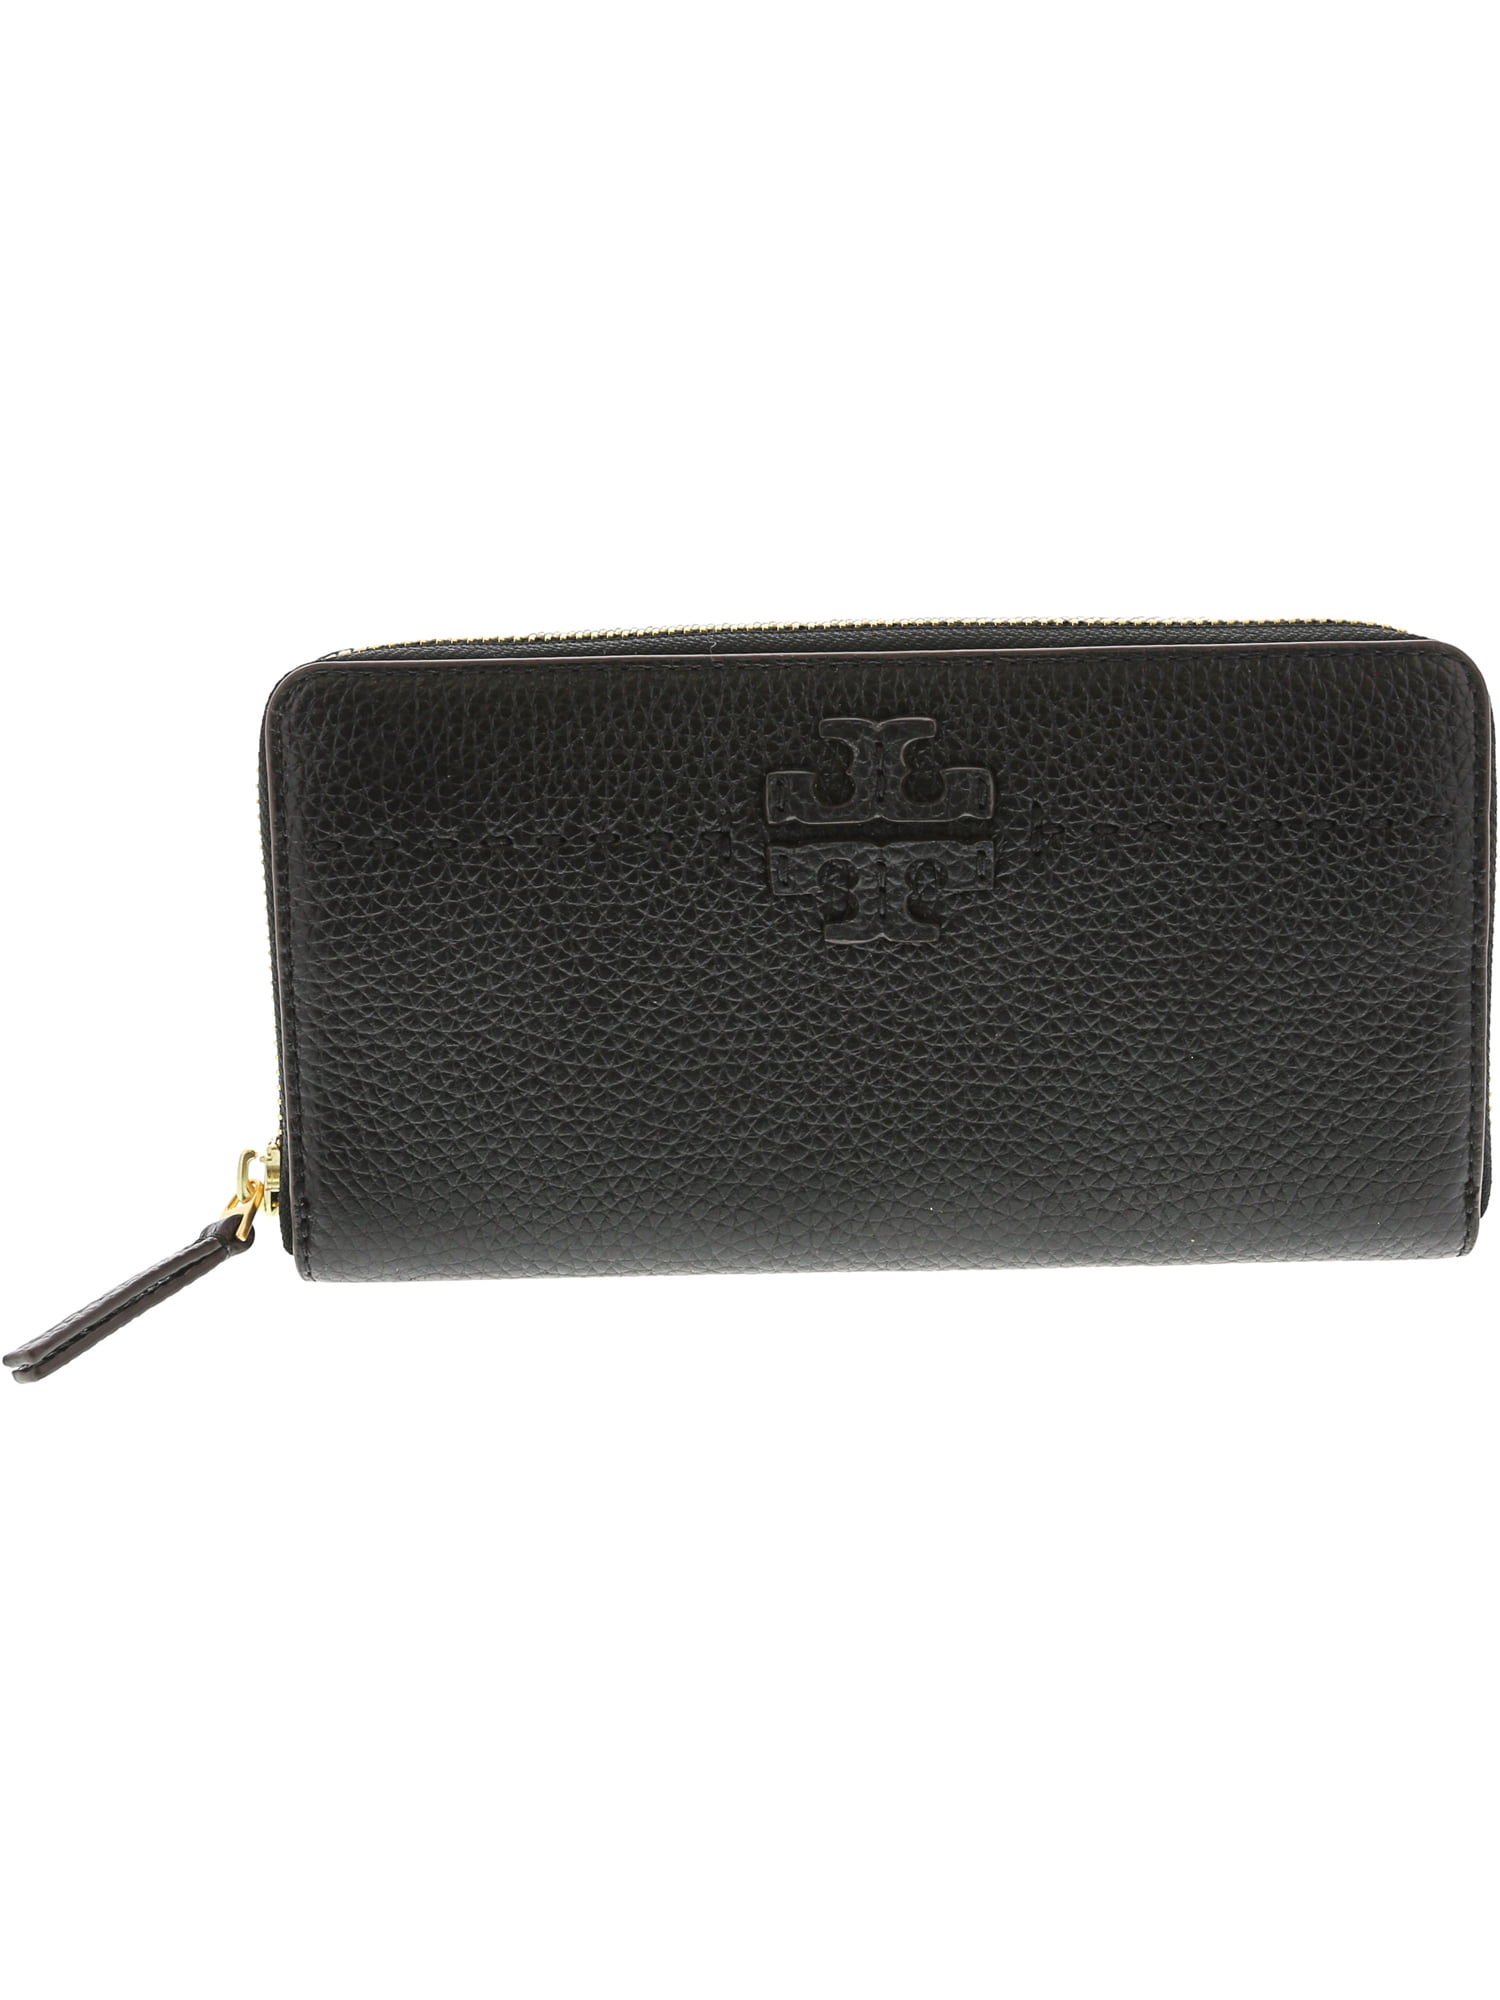 Tory Burch Women's Mcgraw Zip Continental Leather Wallet - Black -  